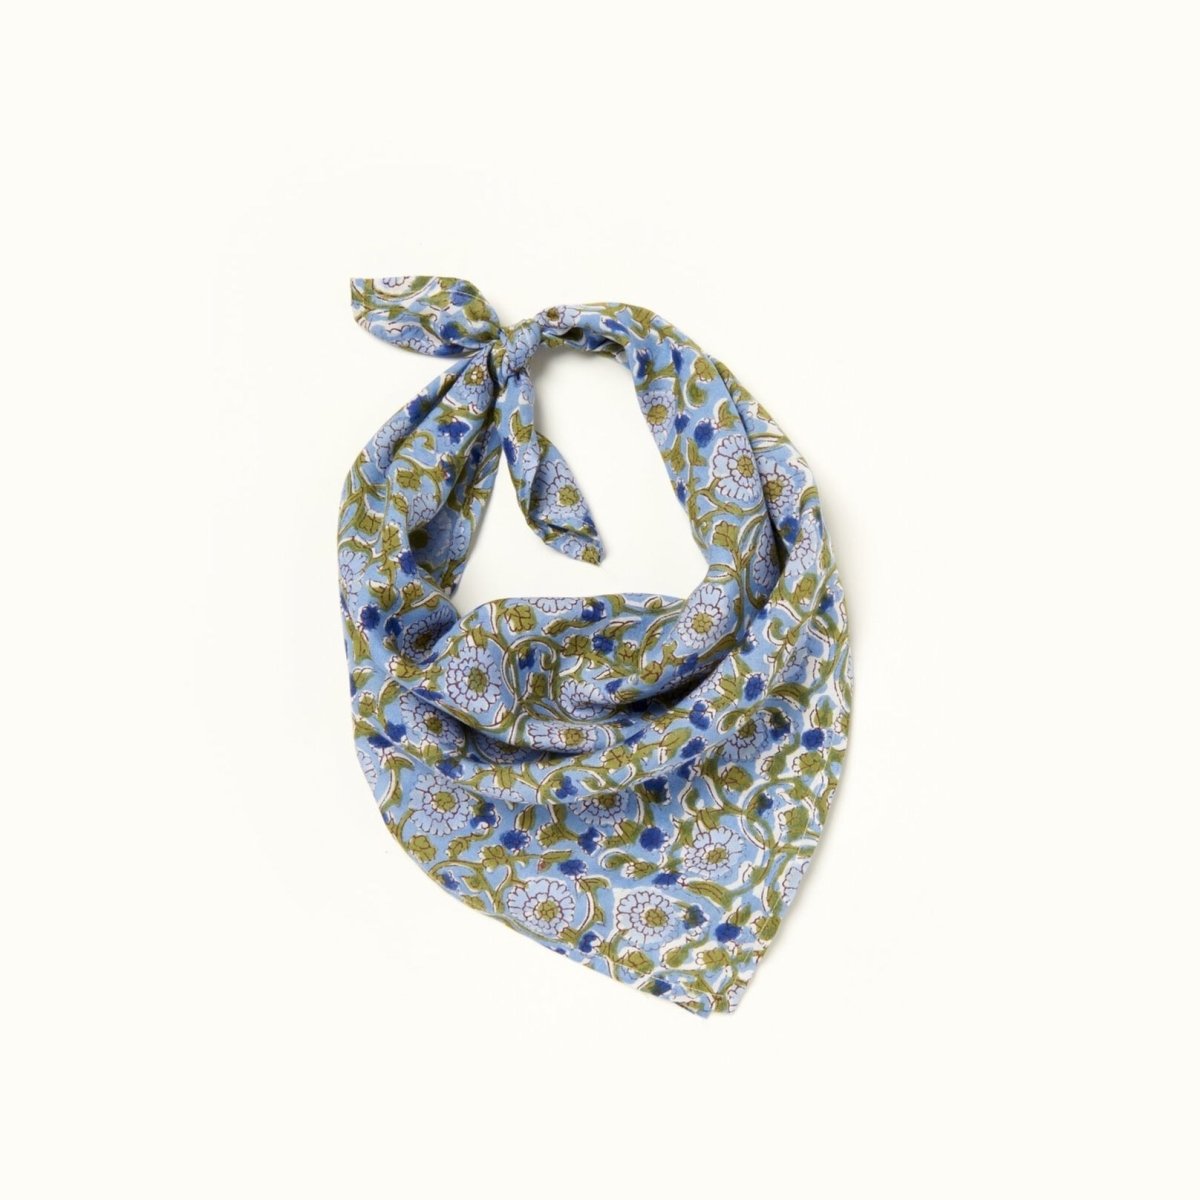 A light blue, dark blue and green floral patterned bandana, folded over and tied in a knot. Block printed by hand, the Alma Bandana from Maelu is designed in Portland, Oregon and handmade in India.